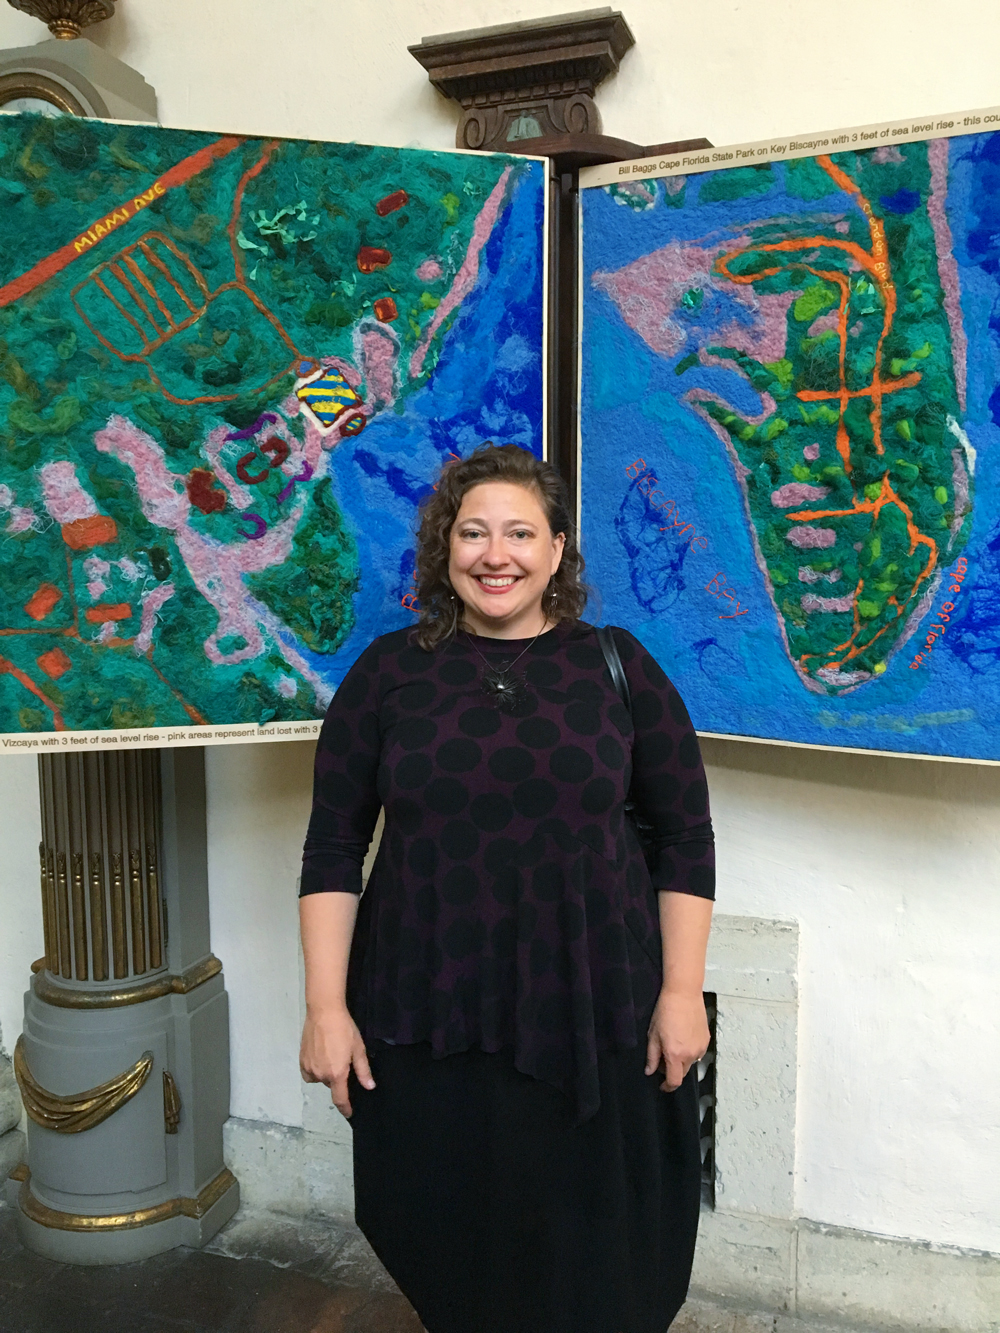 Vizcaya Museum Lost Spaces Art Show. Felt Map art pieces showing the sea level rise by Lucinda Linderman.